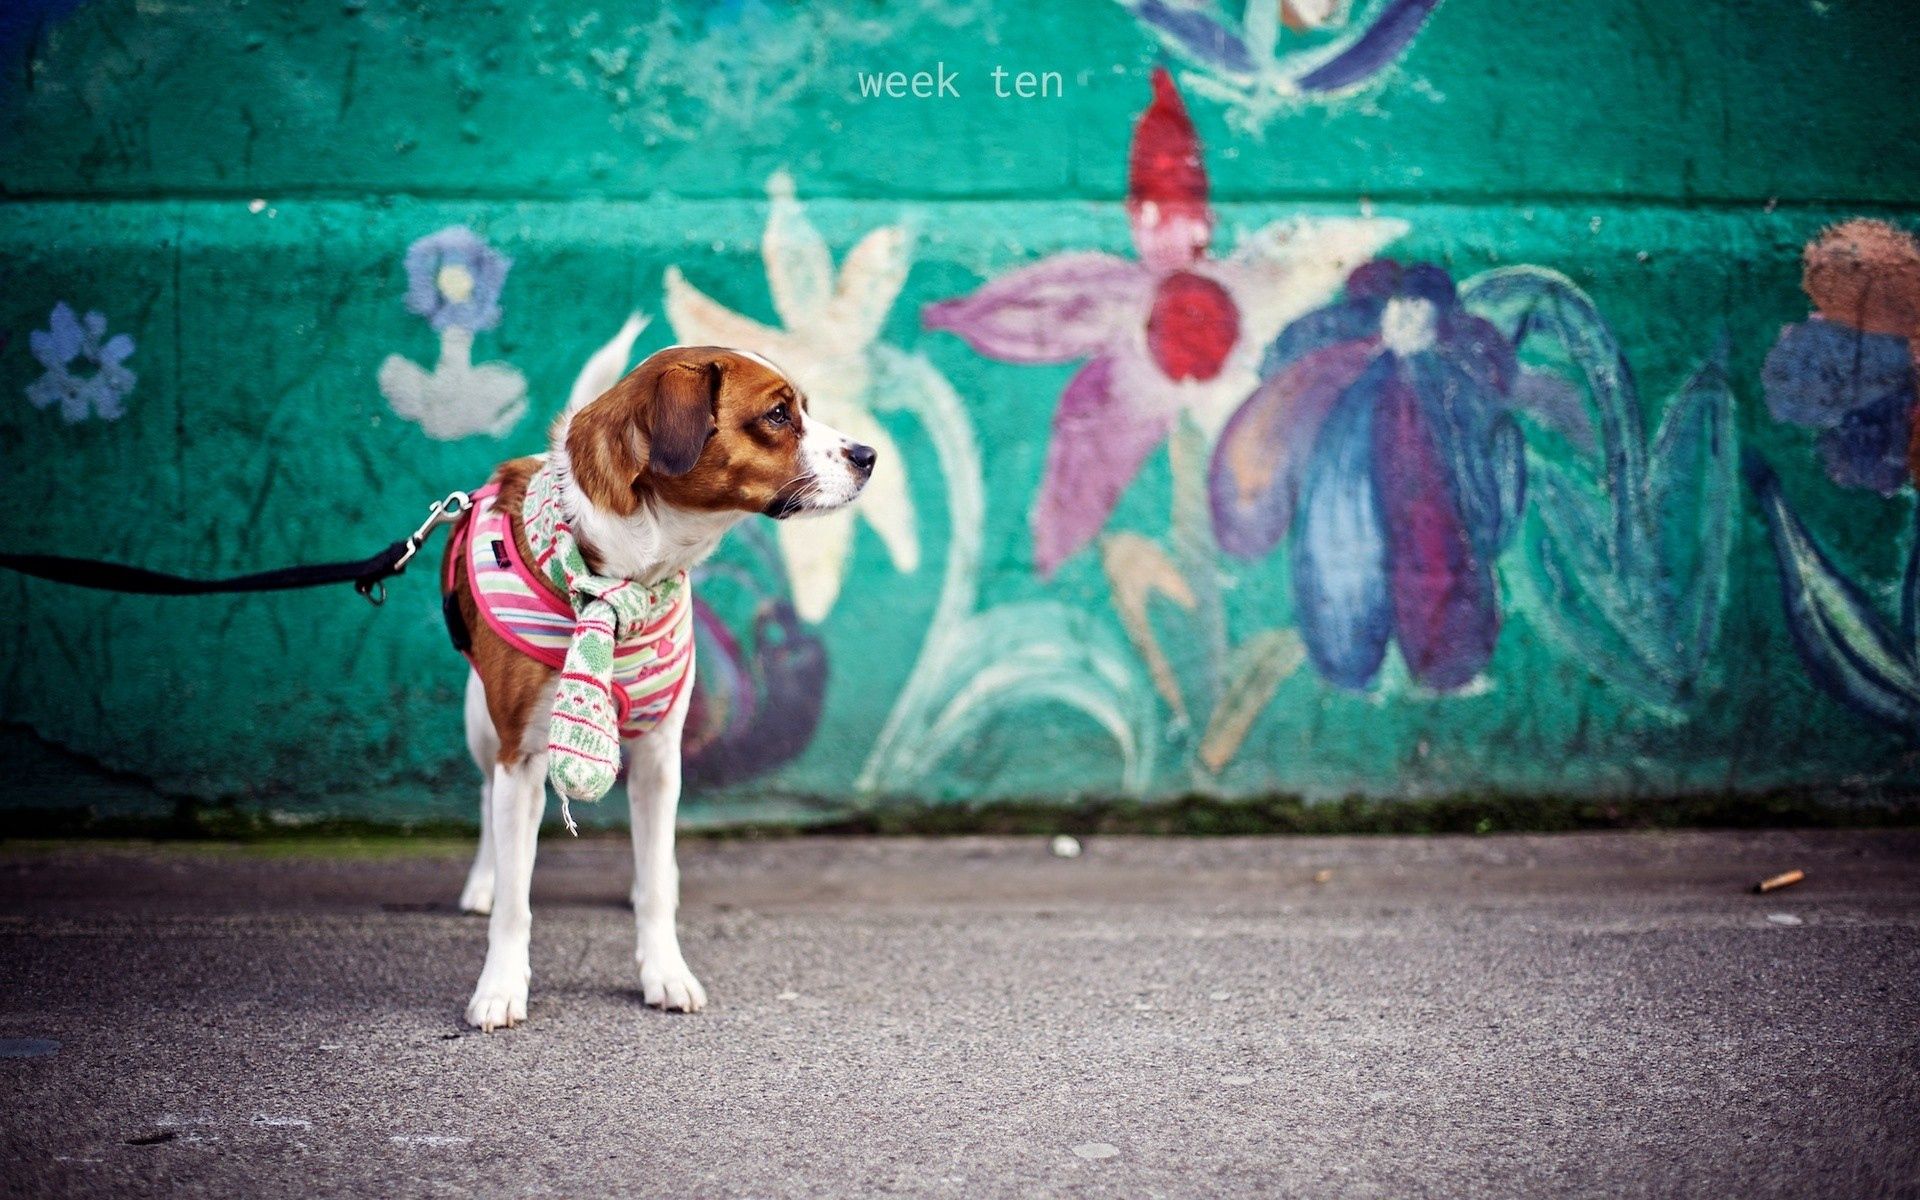 animals, dog, leash, wall, kid, tot, graffiti wallpapers for tablet